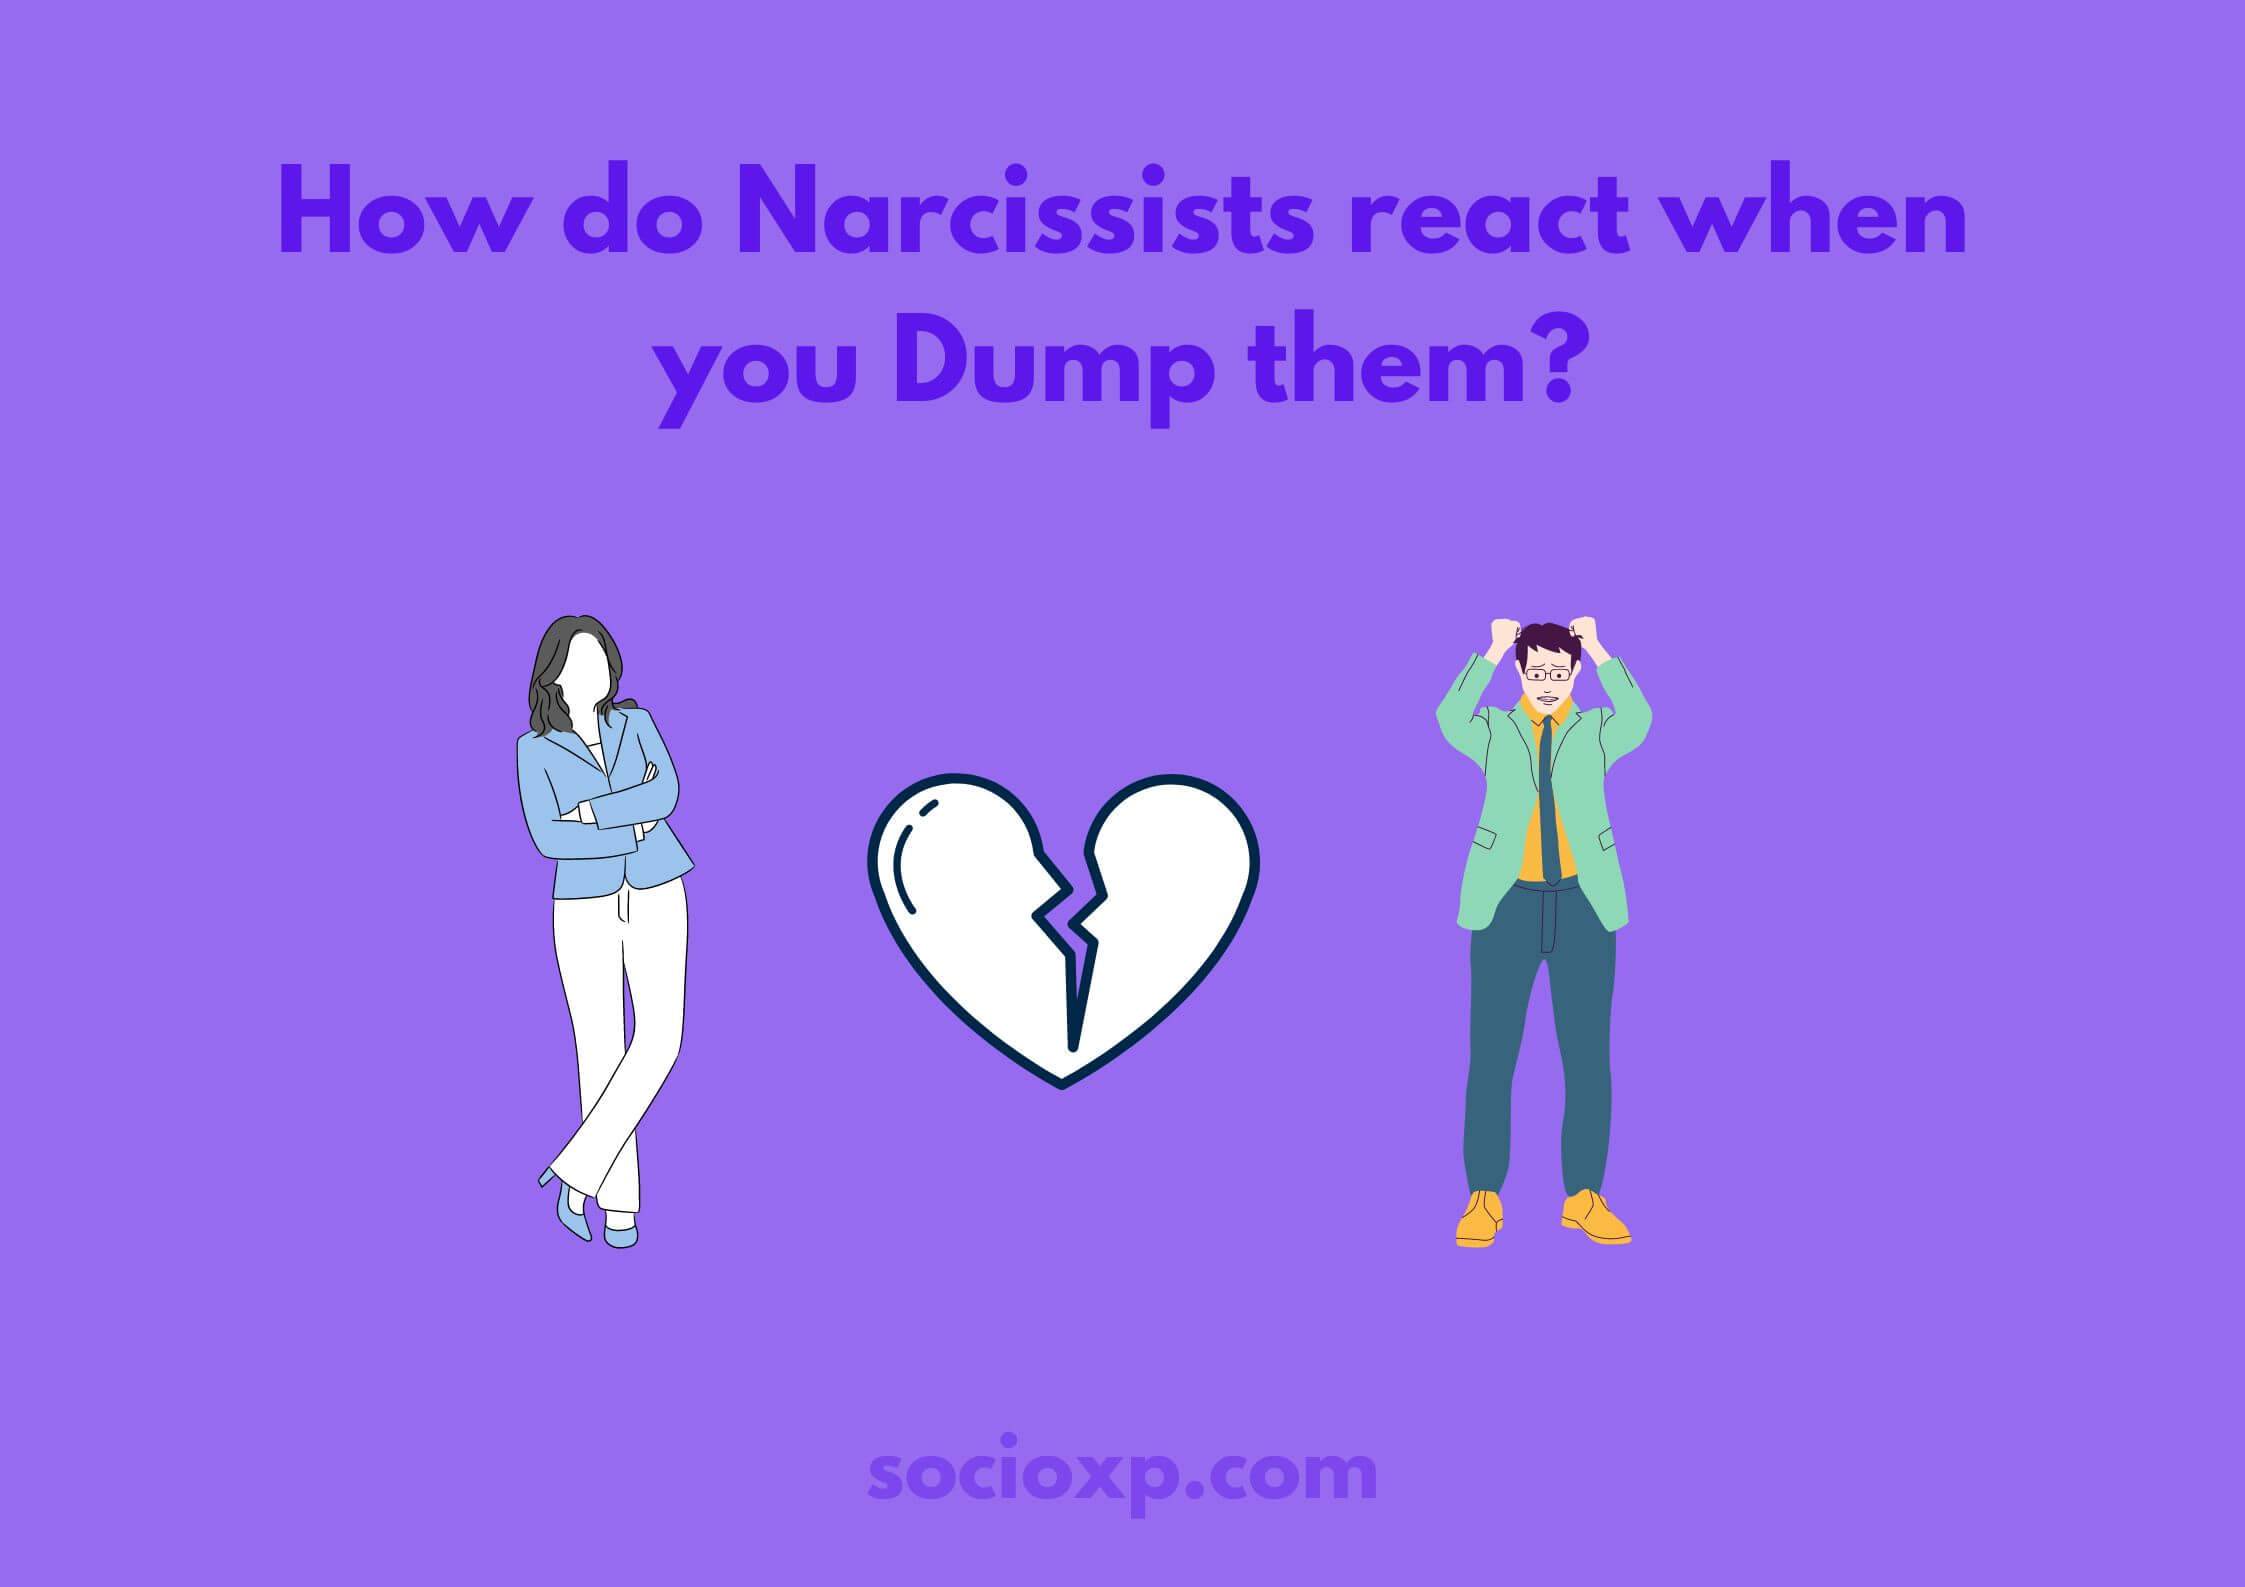 How Do Narcissists React When You Dump Them?